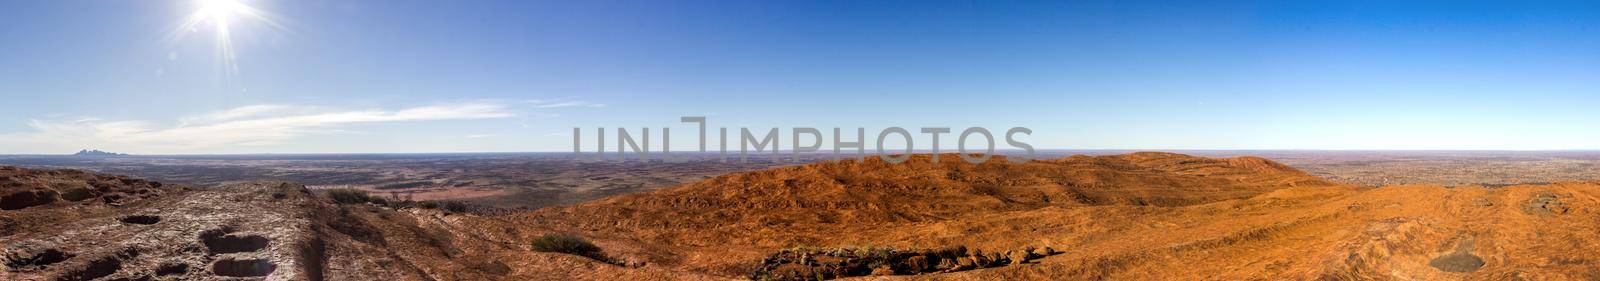 panorama of the view from the uluru after hiking up the Uluru, ayers Rock, the Red Center of Australia